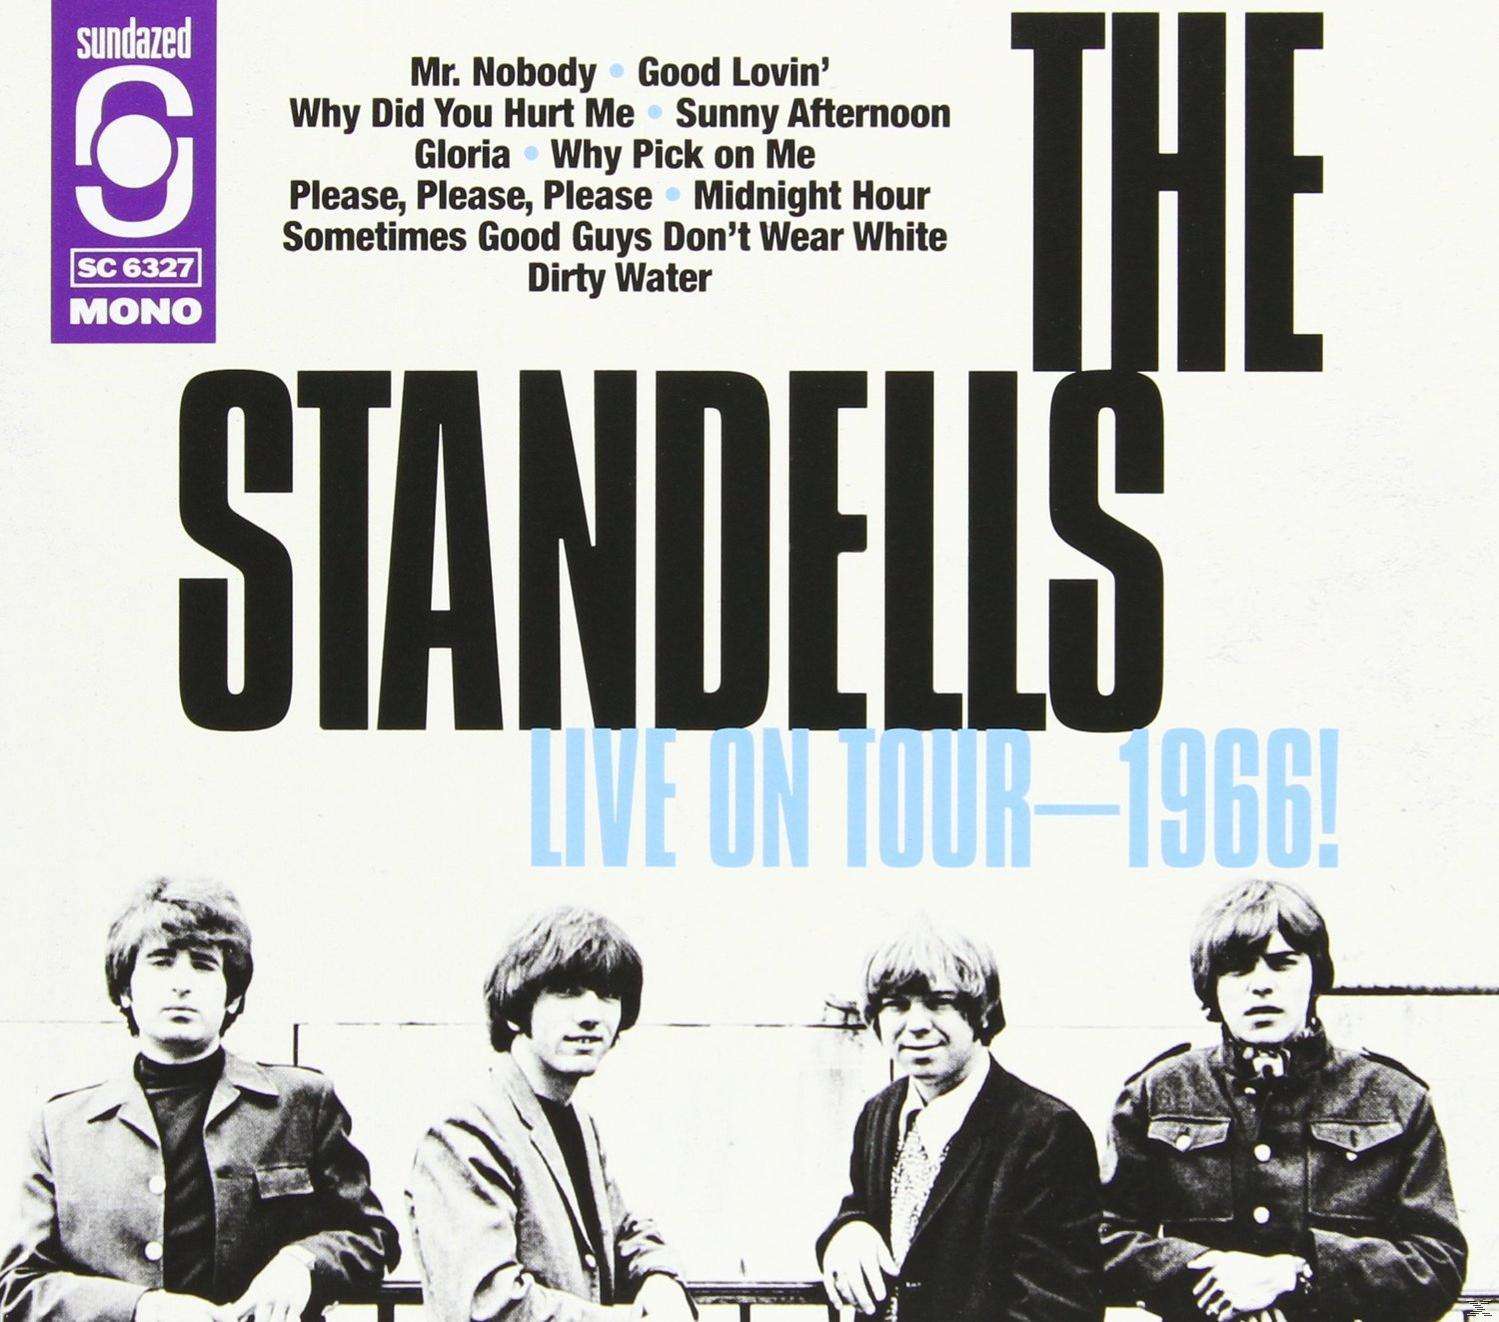 Standells - The Live - Tour-1966! (CD) On